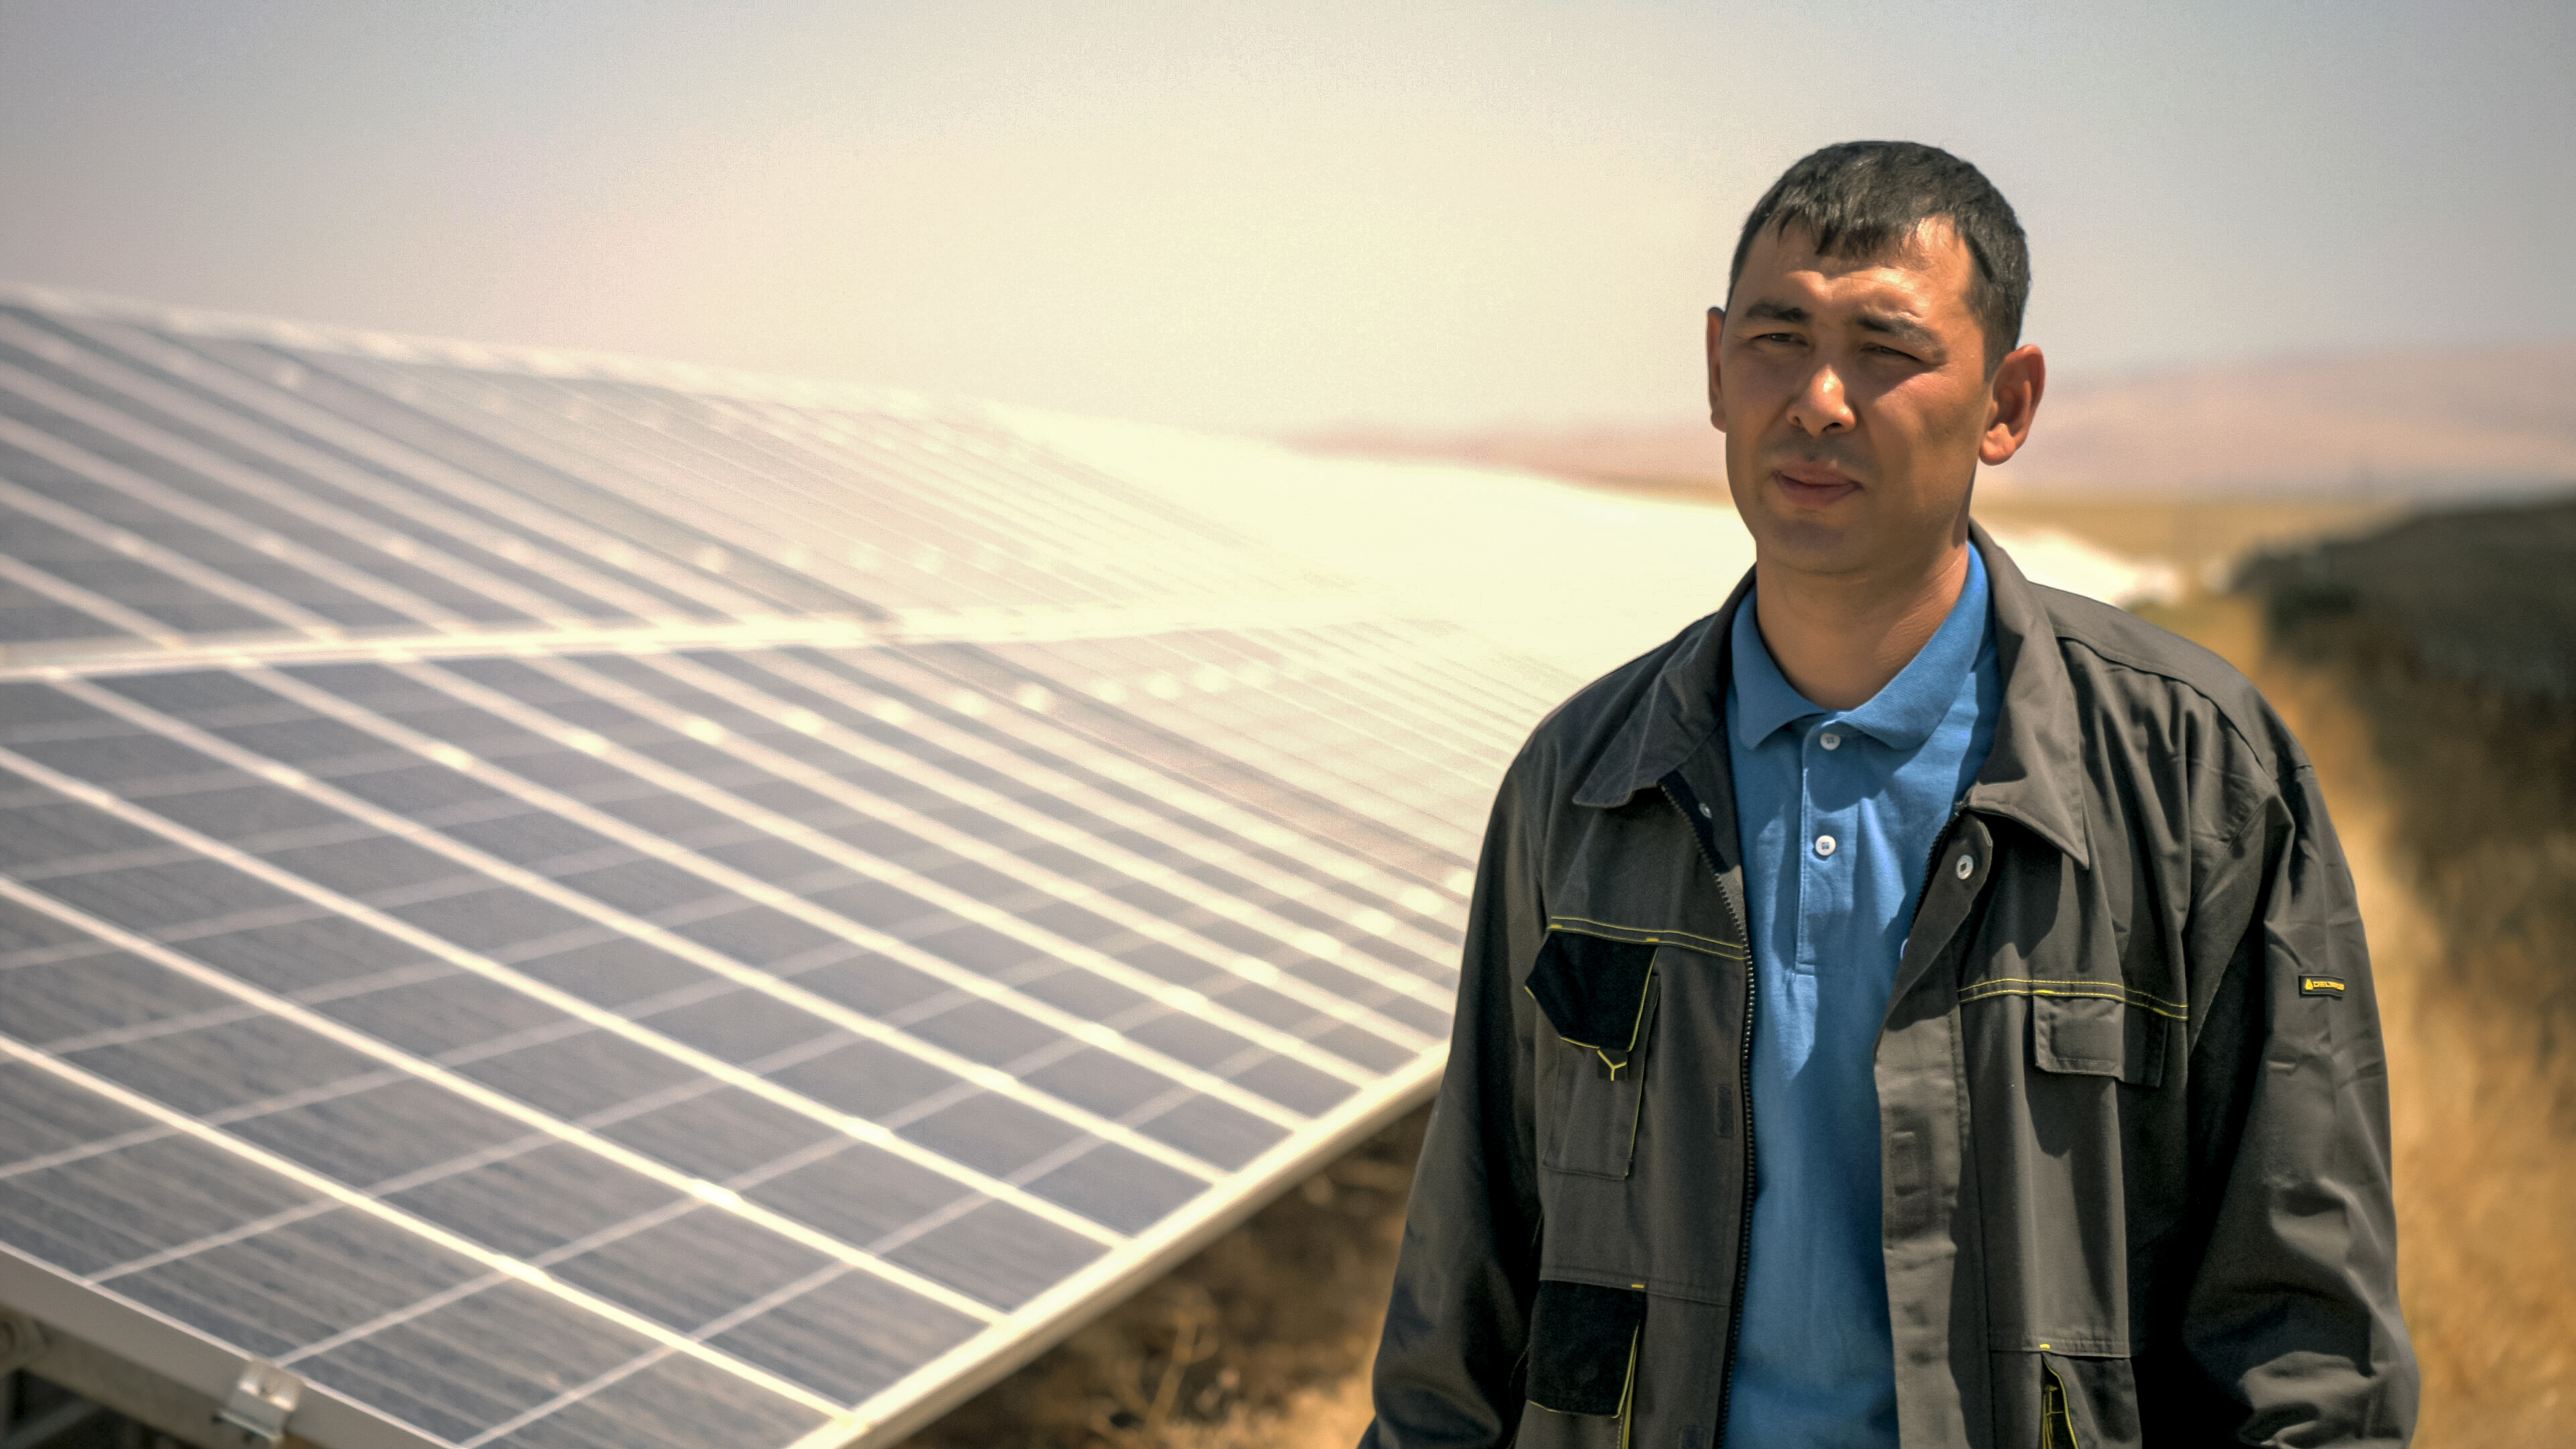 After leaving a long career in fossil fuels, solar technician Ruslan Mametov is proud to work at Burnoye Solar, Kazakhstan’s first and largest solar power facility.